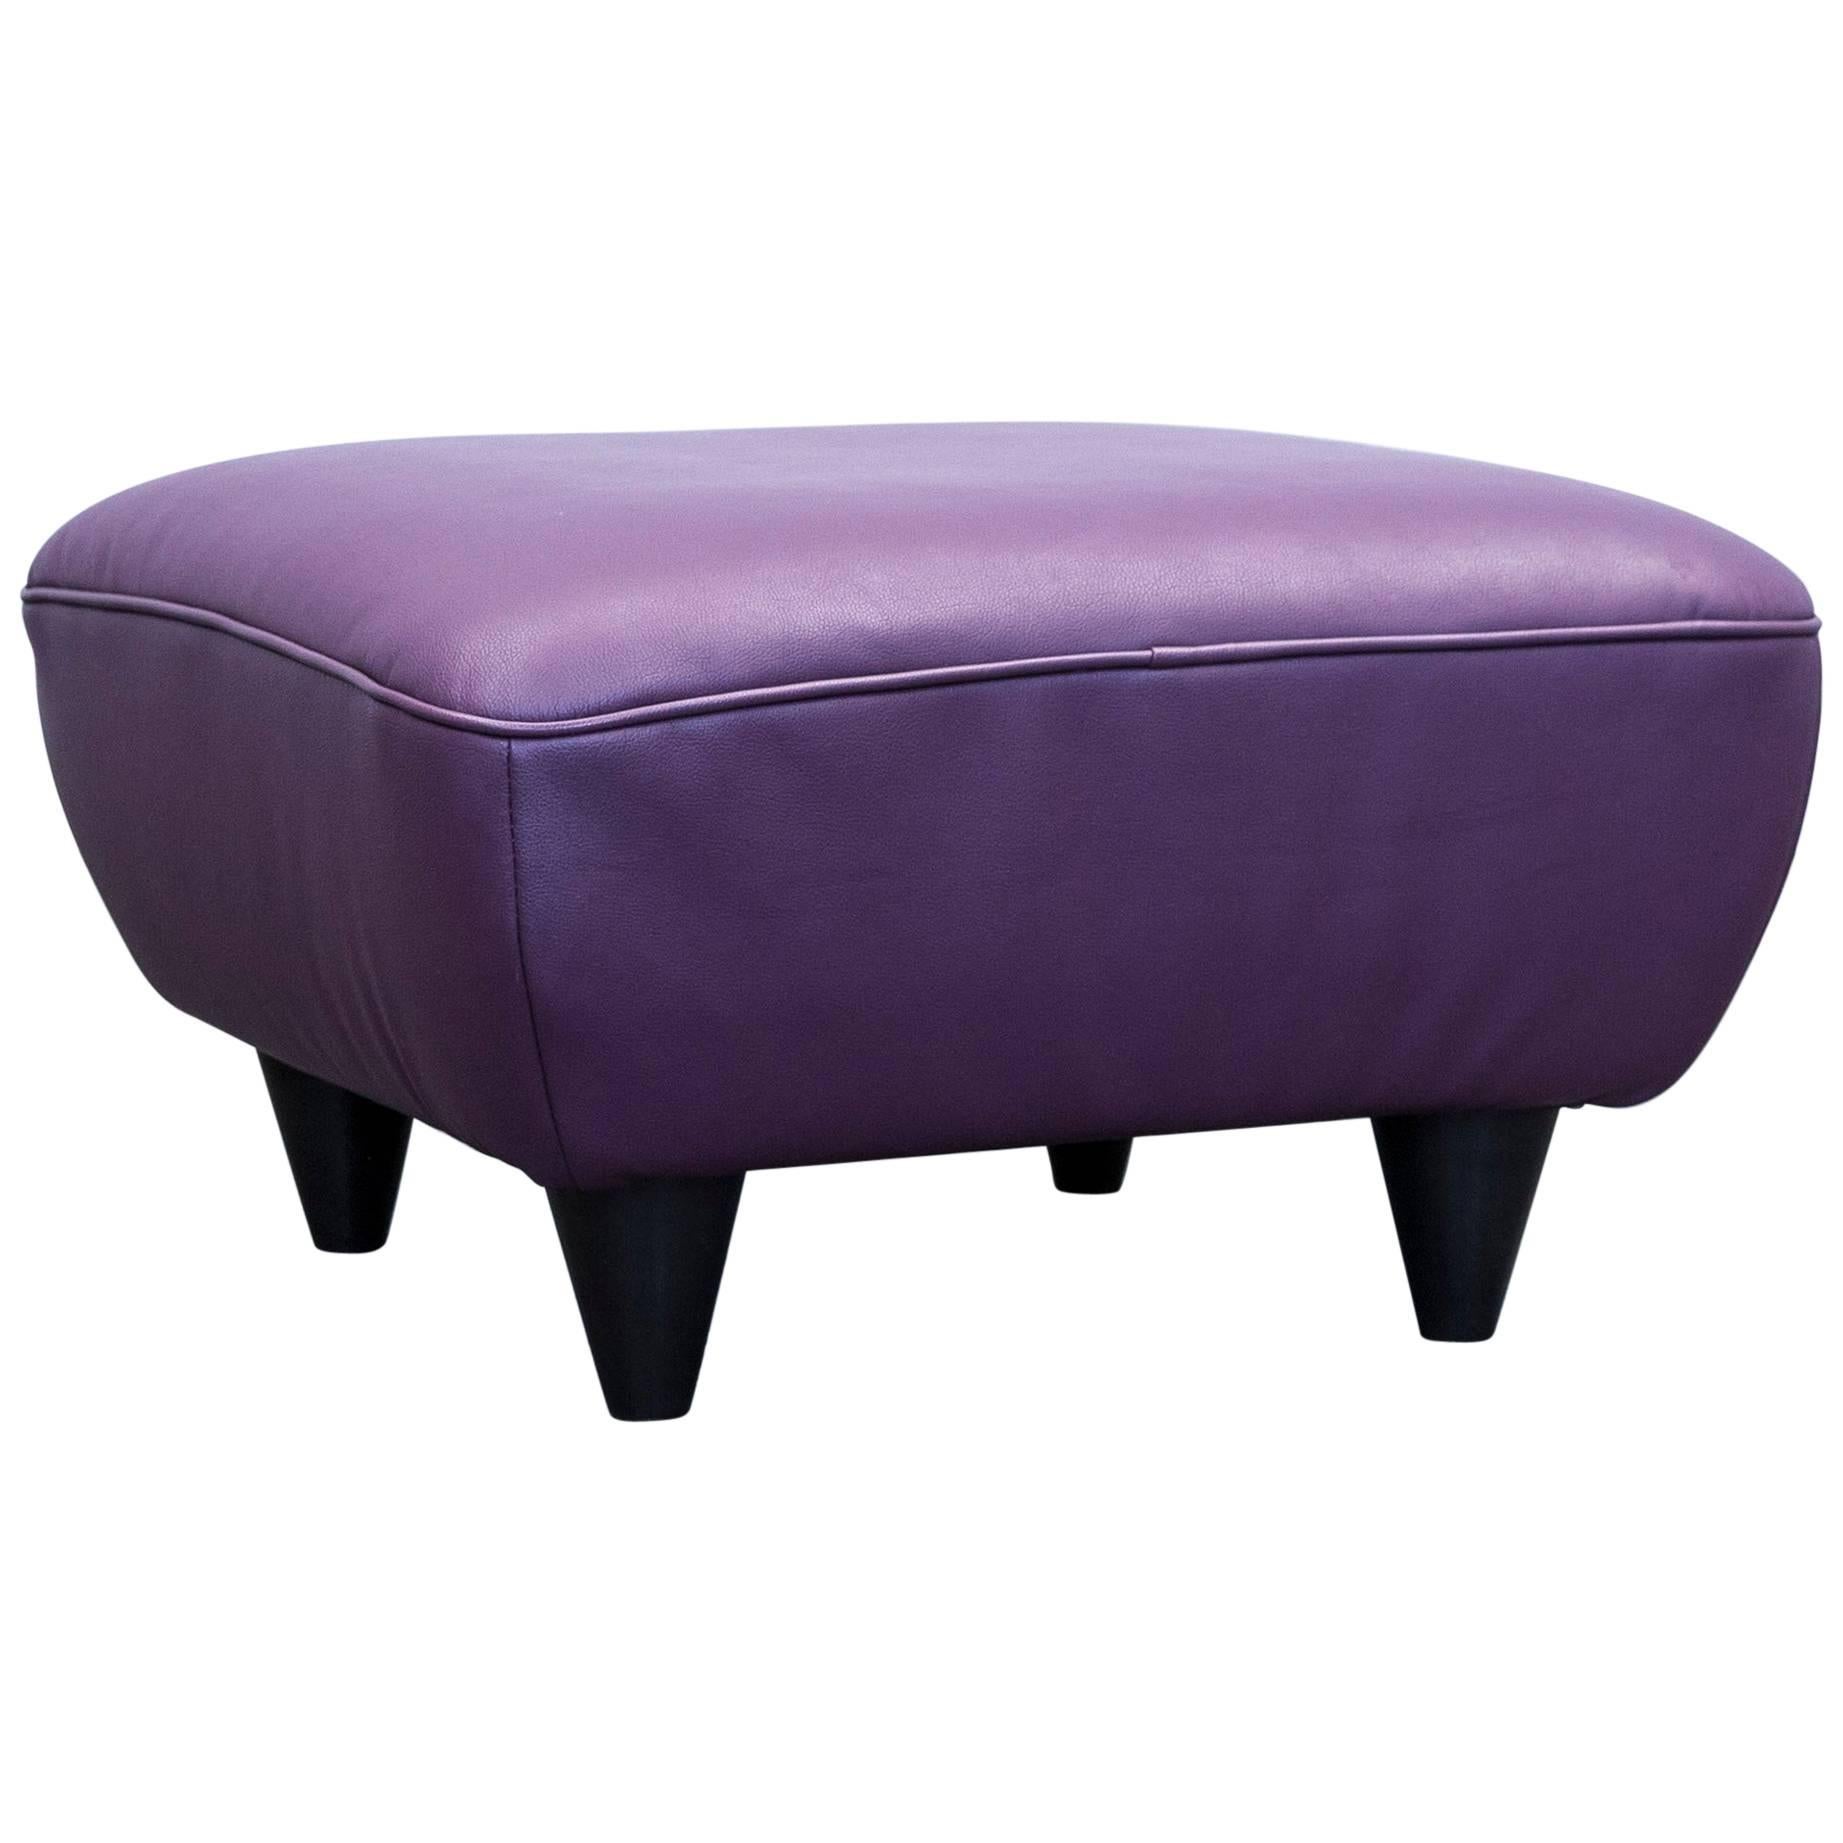 Designer Footstool Faux Leather Lilac One-Seat Pouff Footrest Couch Modern For Sale